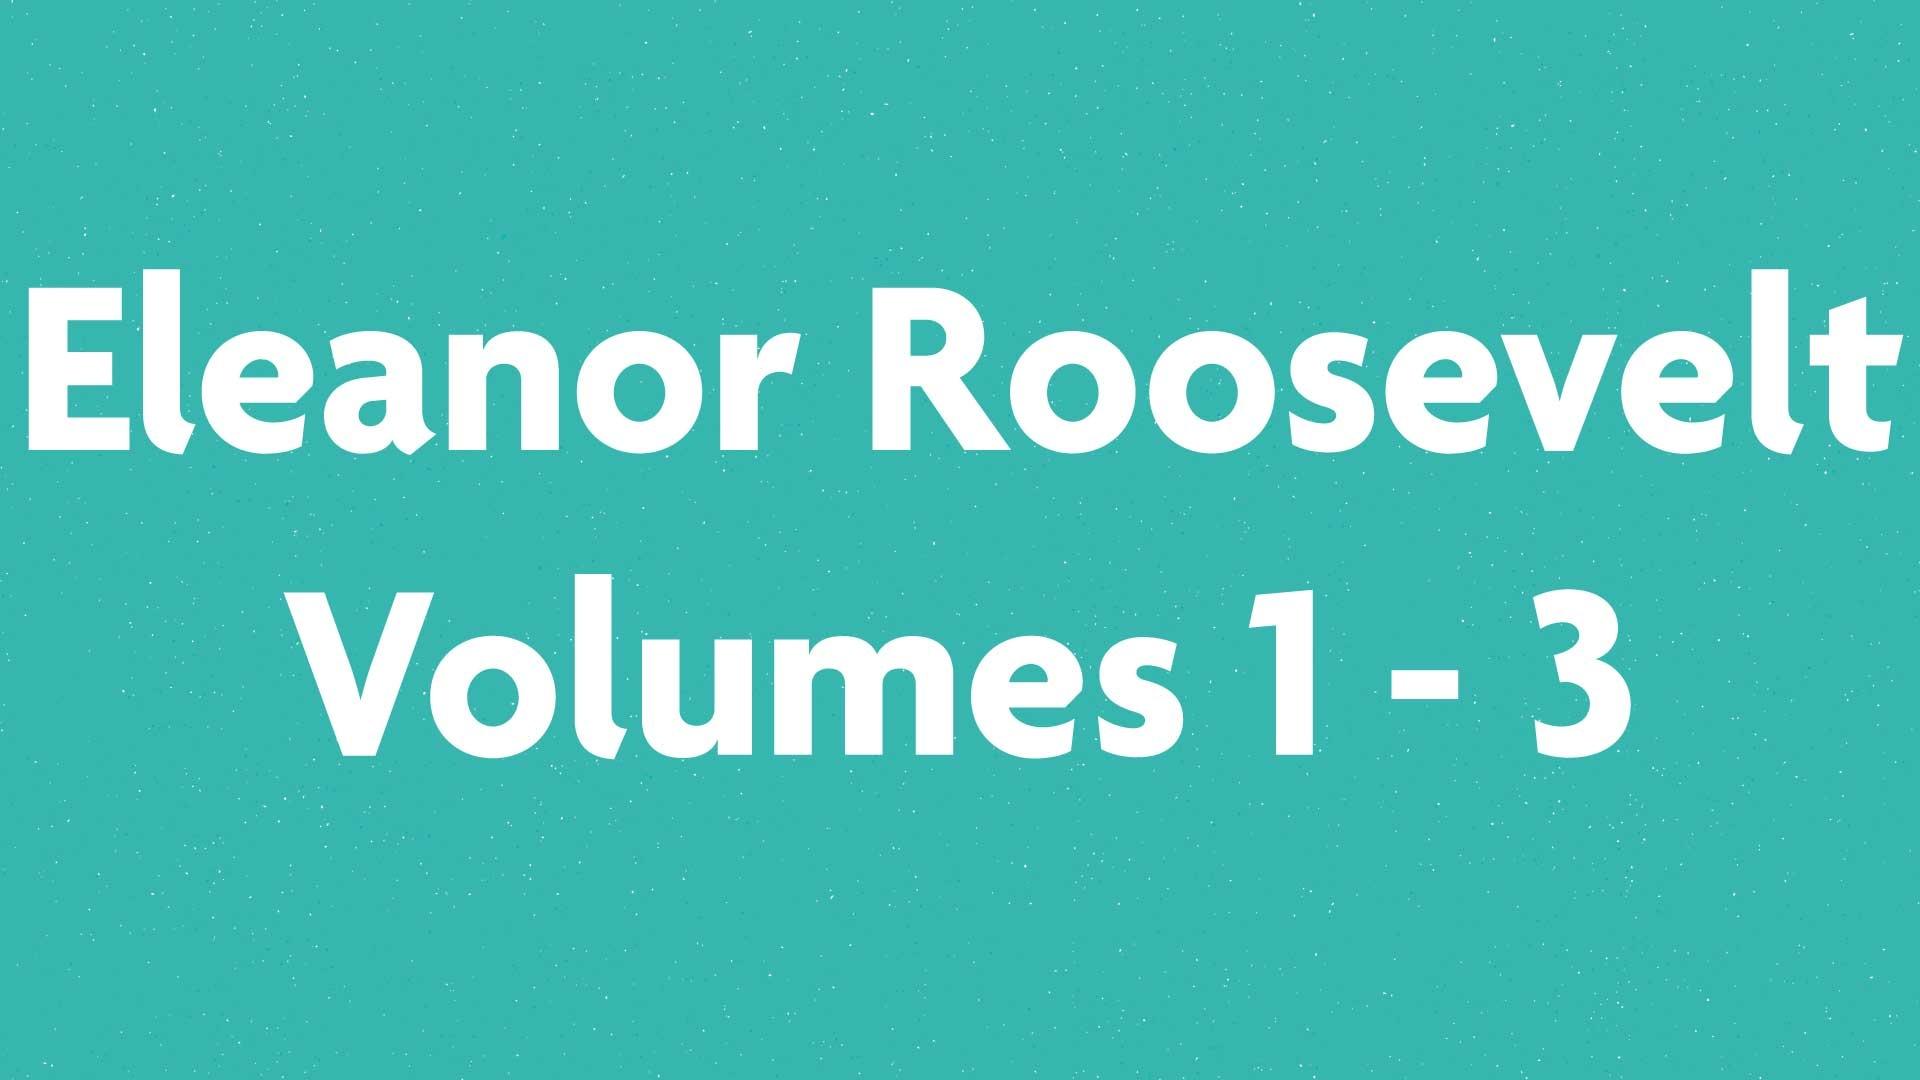 Eleanor Roosevelt, Volumes 1 - 3 book submission card on a green background.